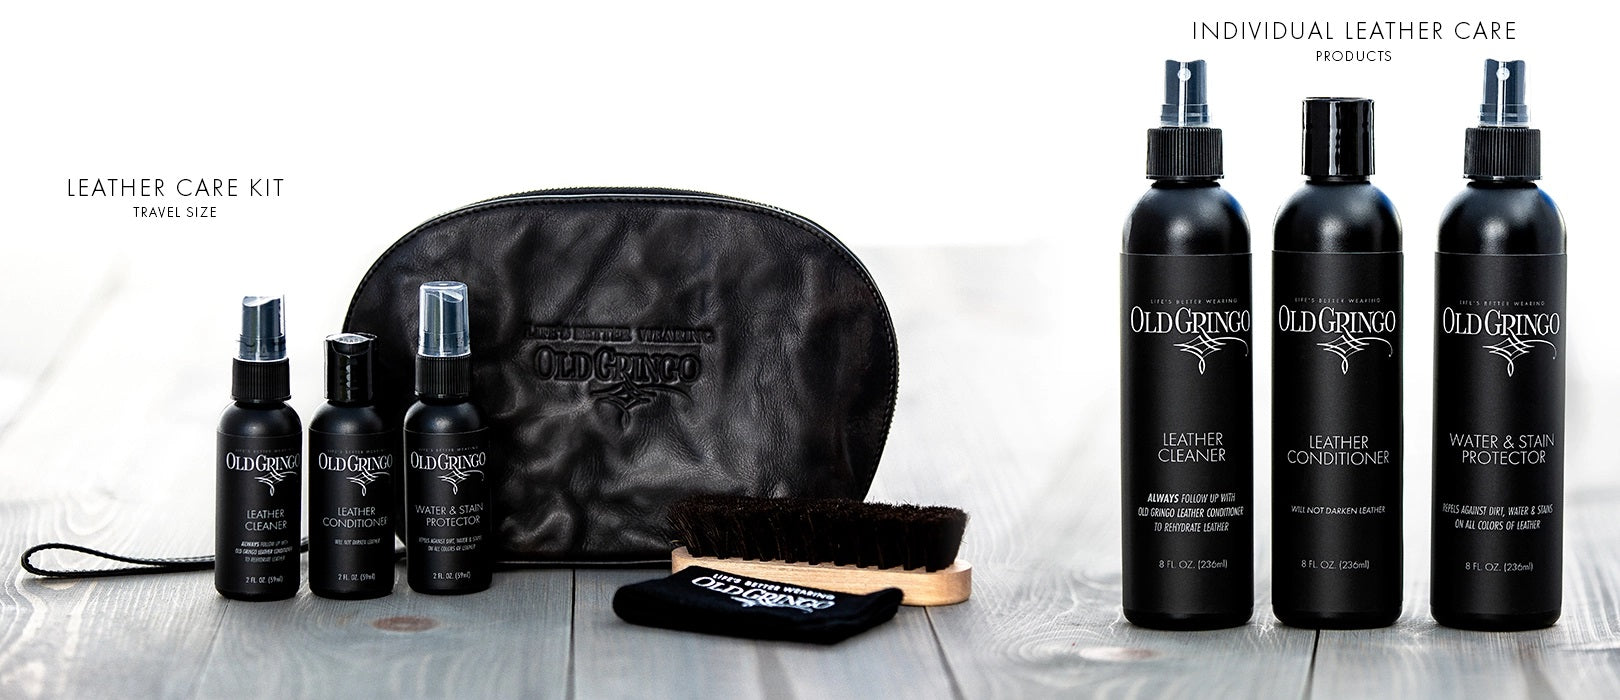 Old Gringo Leather Care Kit